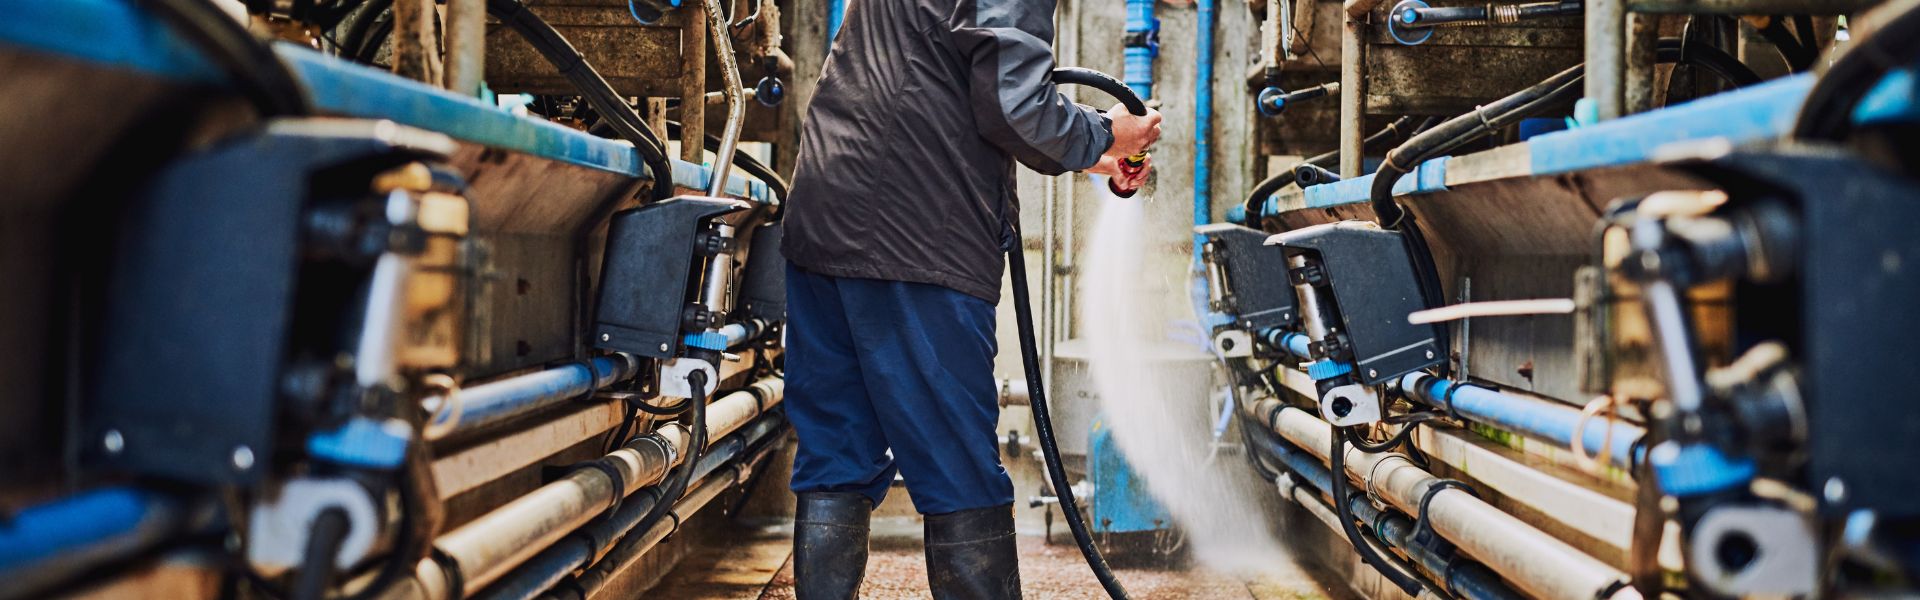 Industrial Cleaning Services in Canada